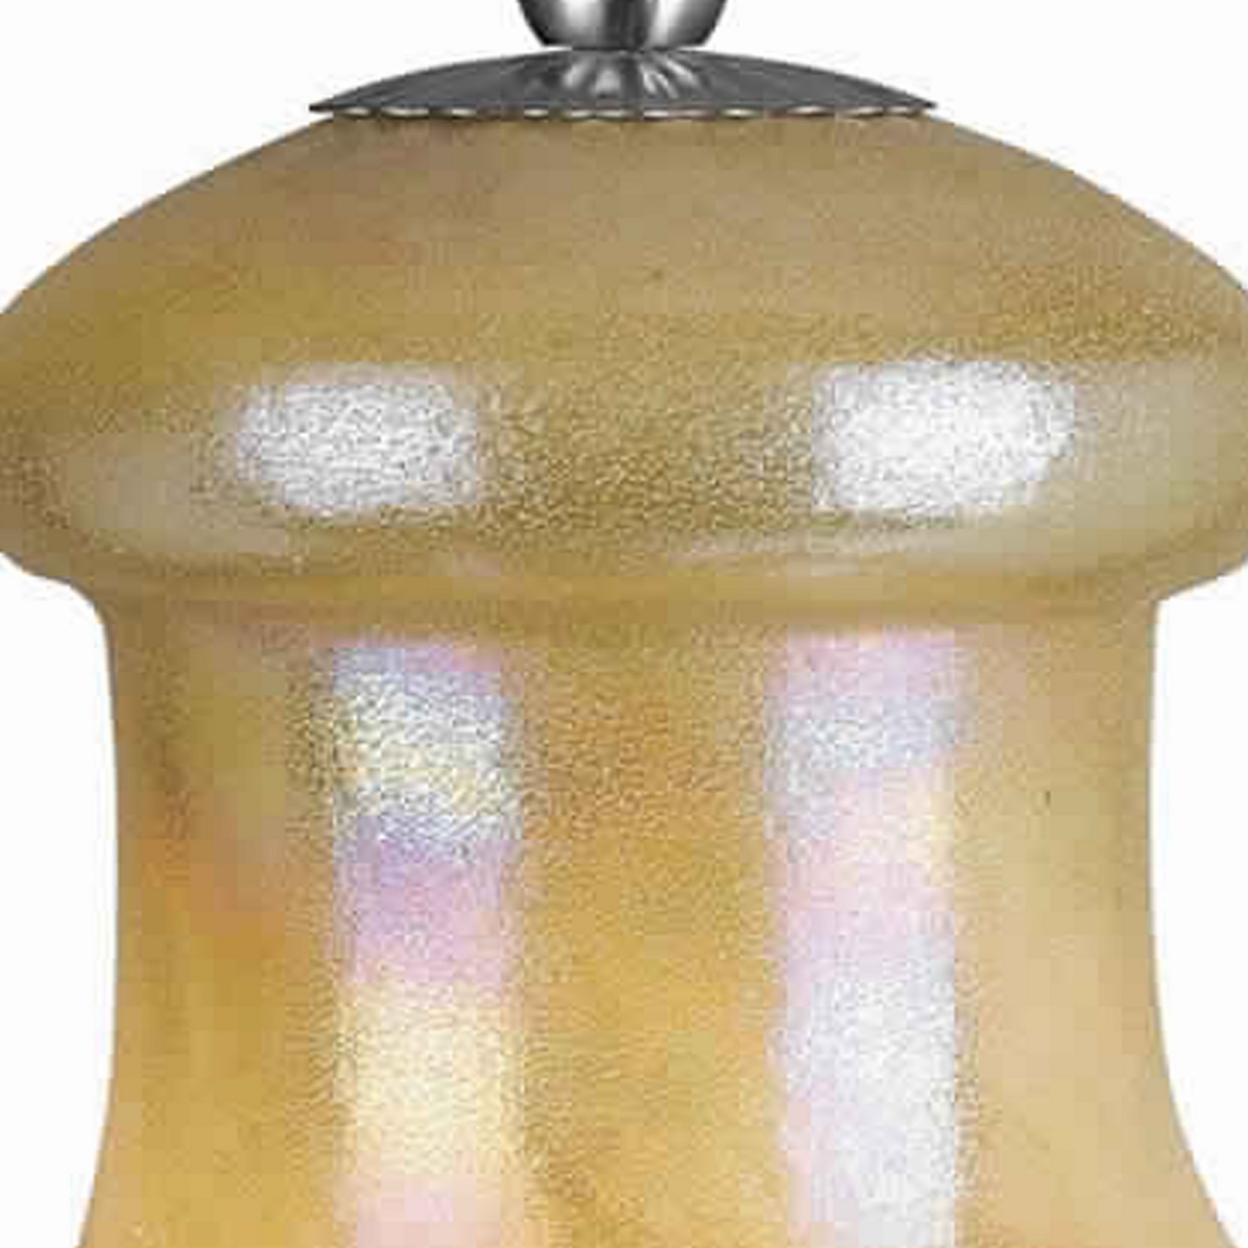 Bell Design Glass Shade Pendant Lighting With Cord, Beige And Silver- Saltoro Sherpi